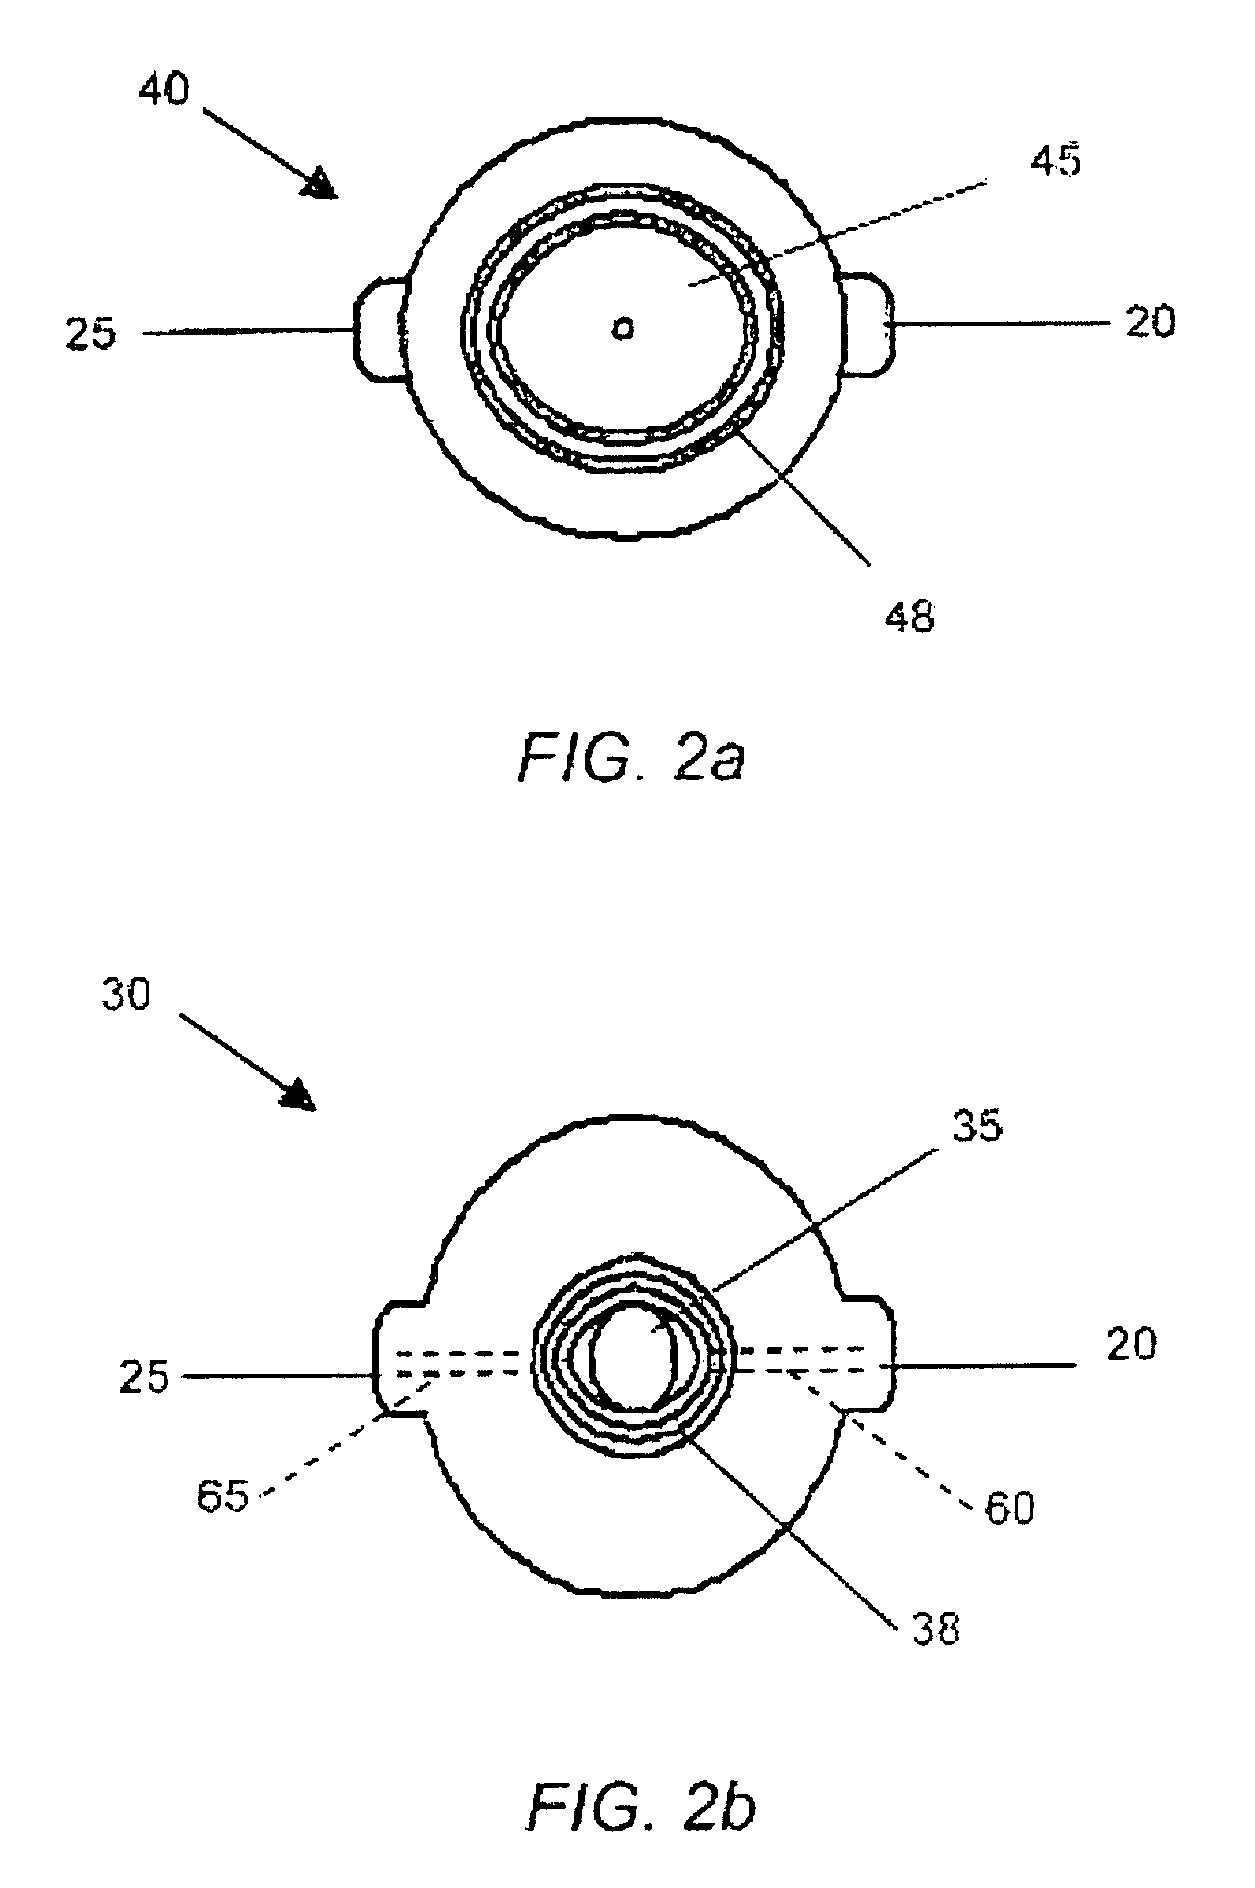 Non-invasive system and method for measuring vacuum pressure in a fluid